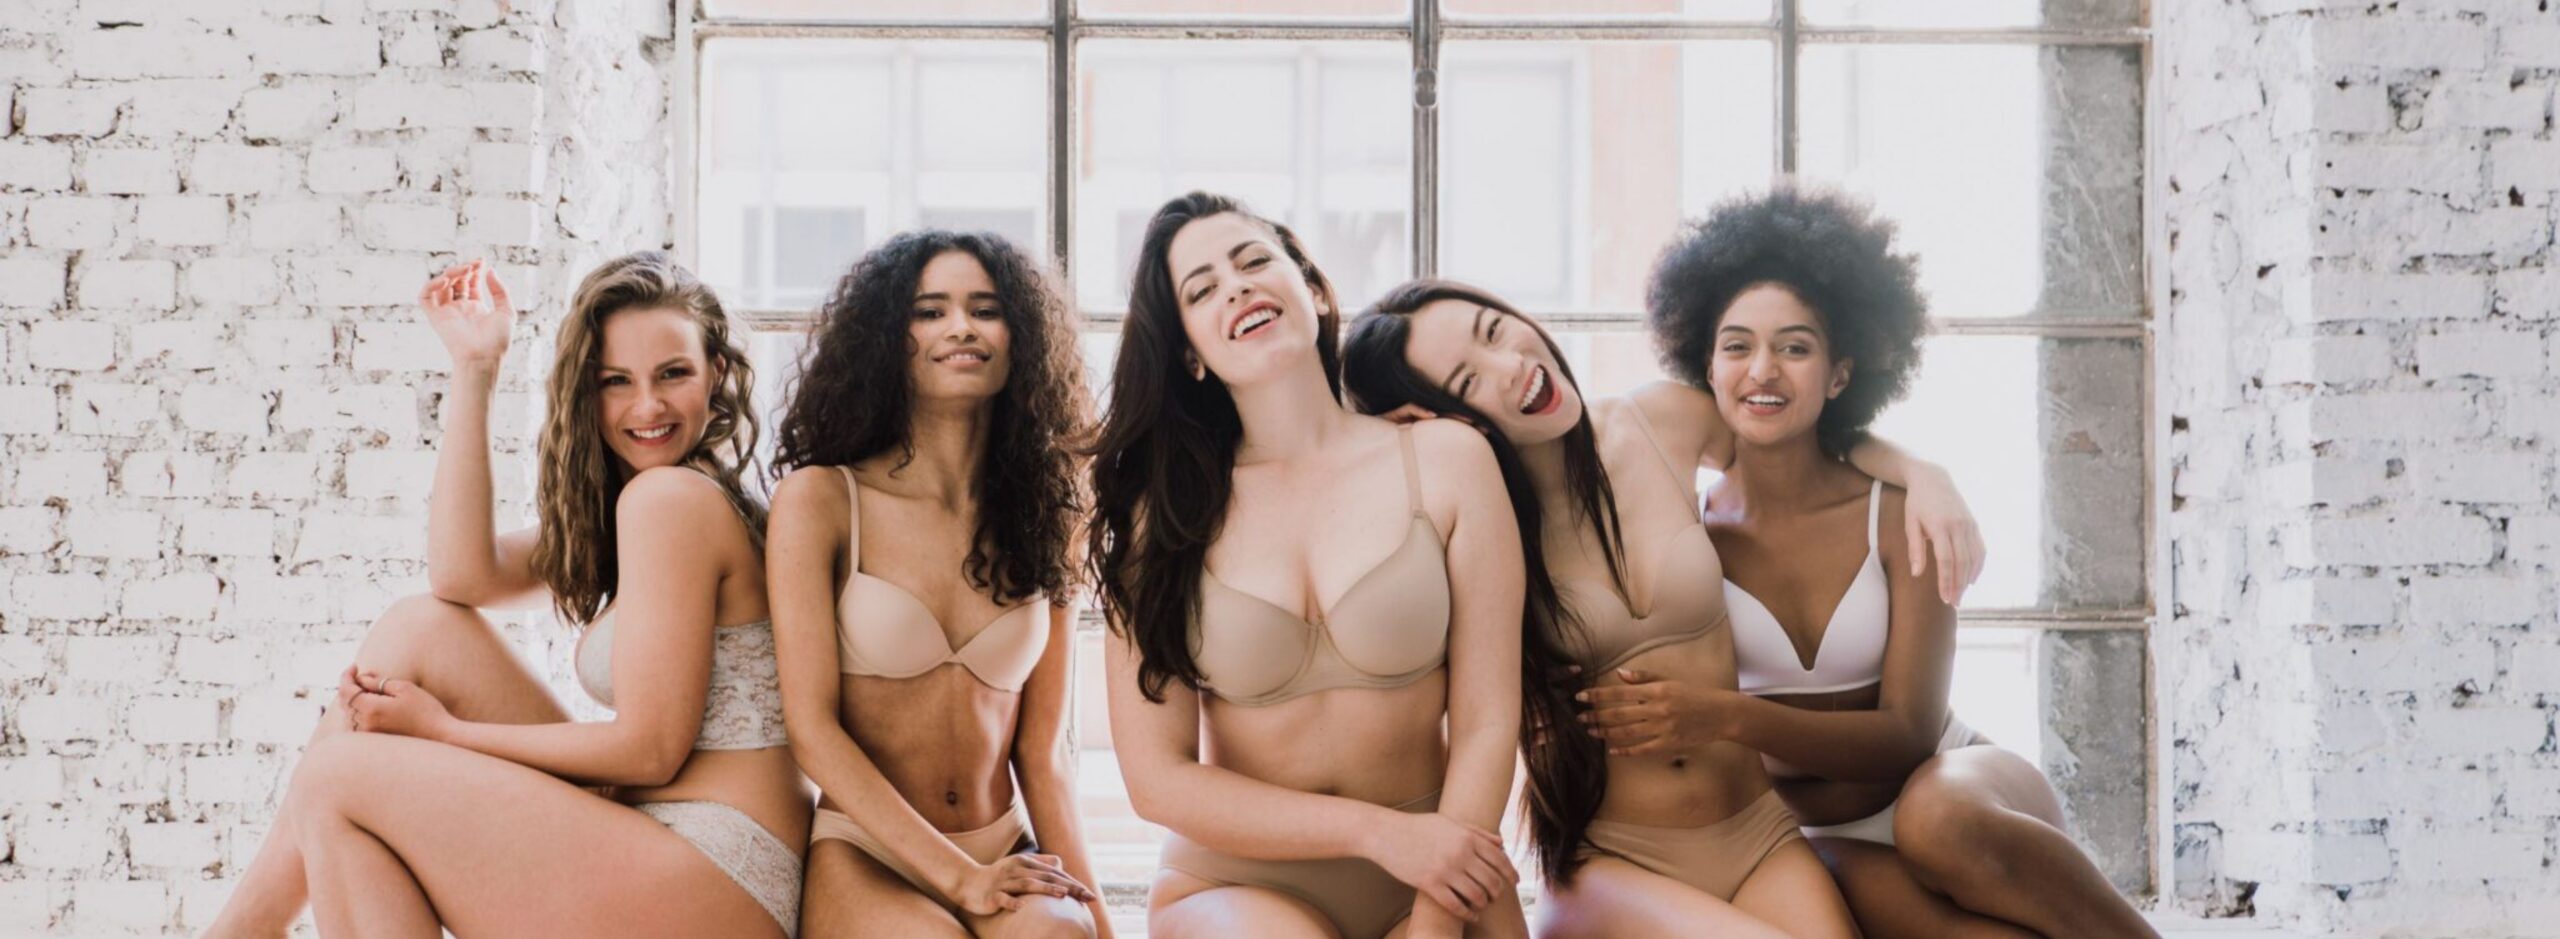 a group of women of different ethnicities posing in their underwear